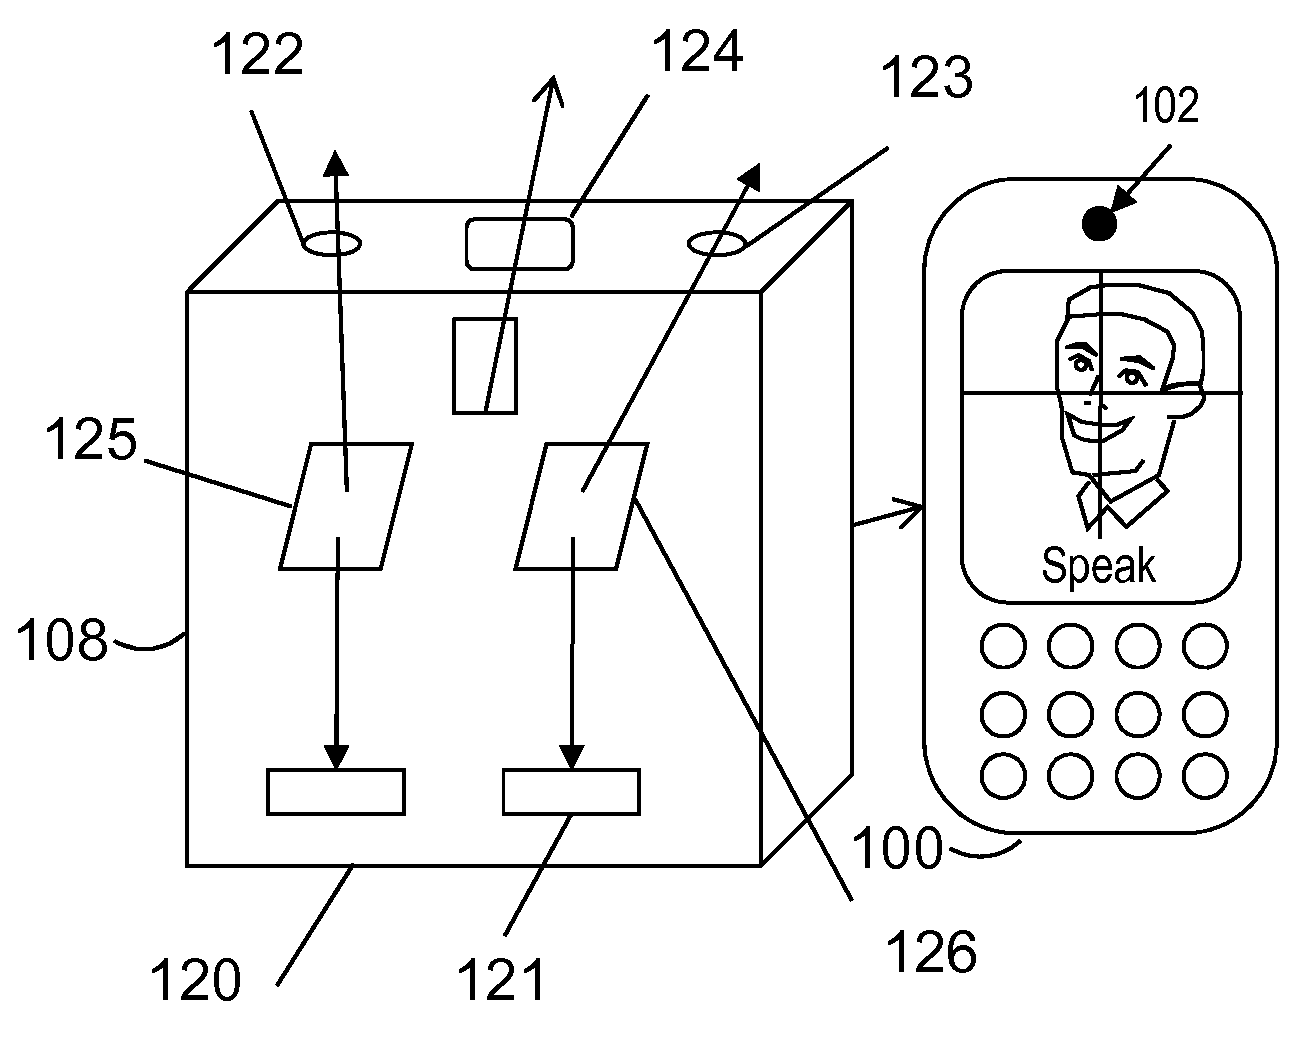 Apparatus for identifying protecting, requesting, assisting and managing information